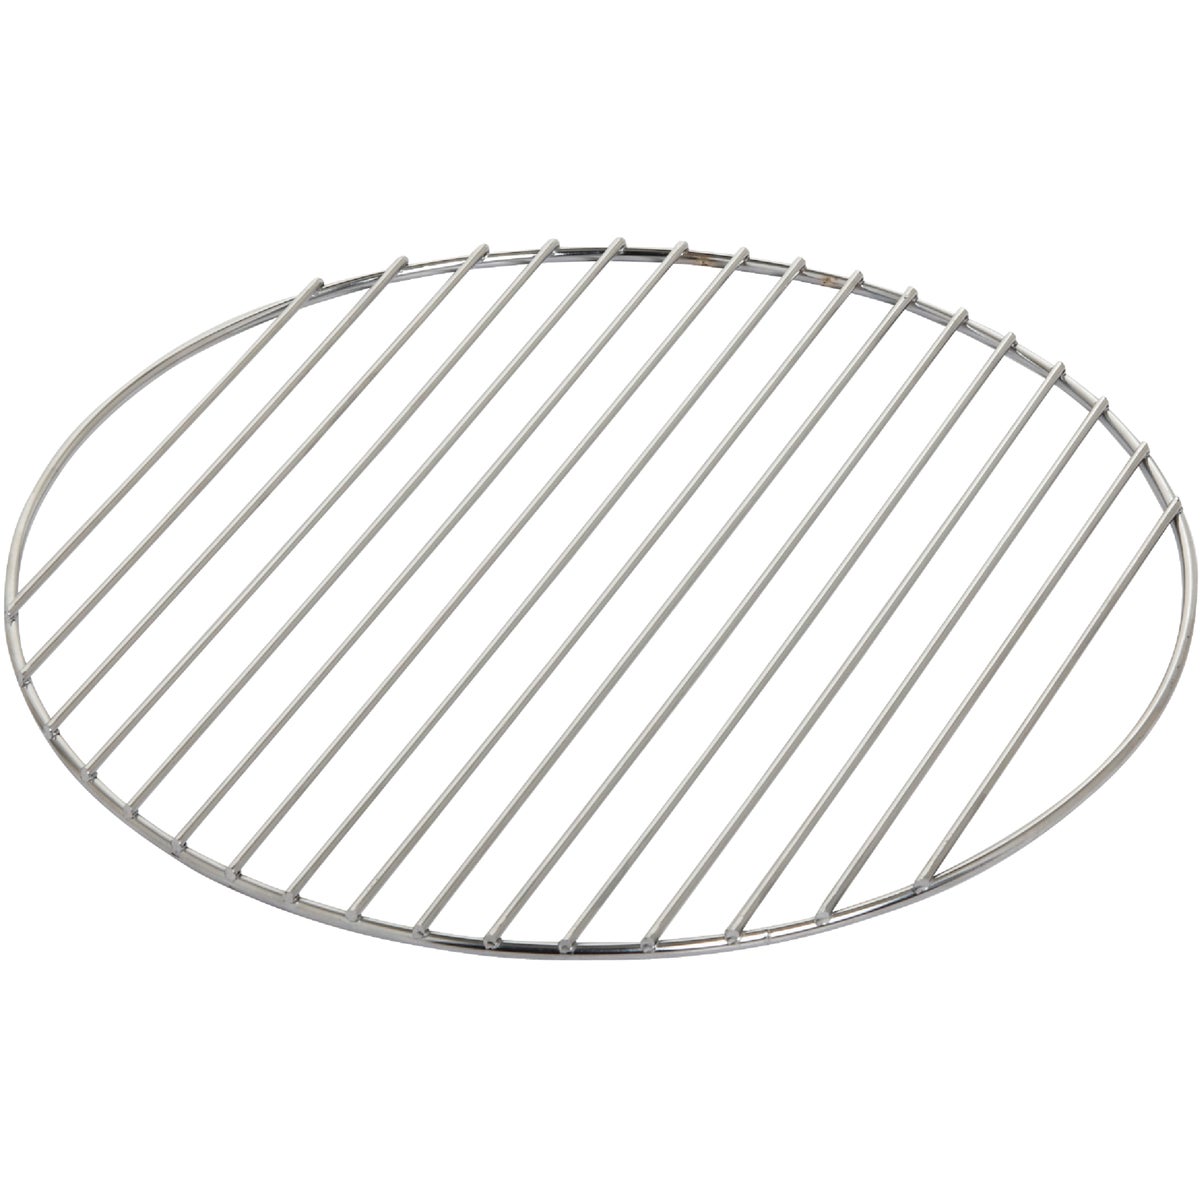 14″ TOP GRILL GRATE